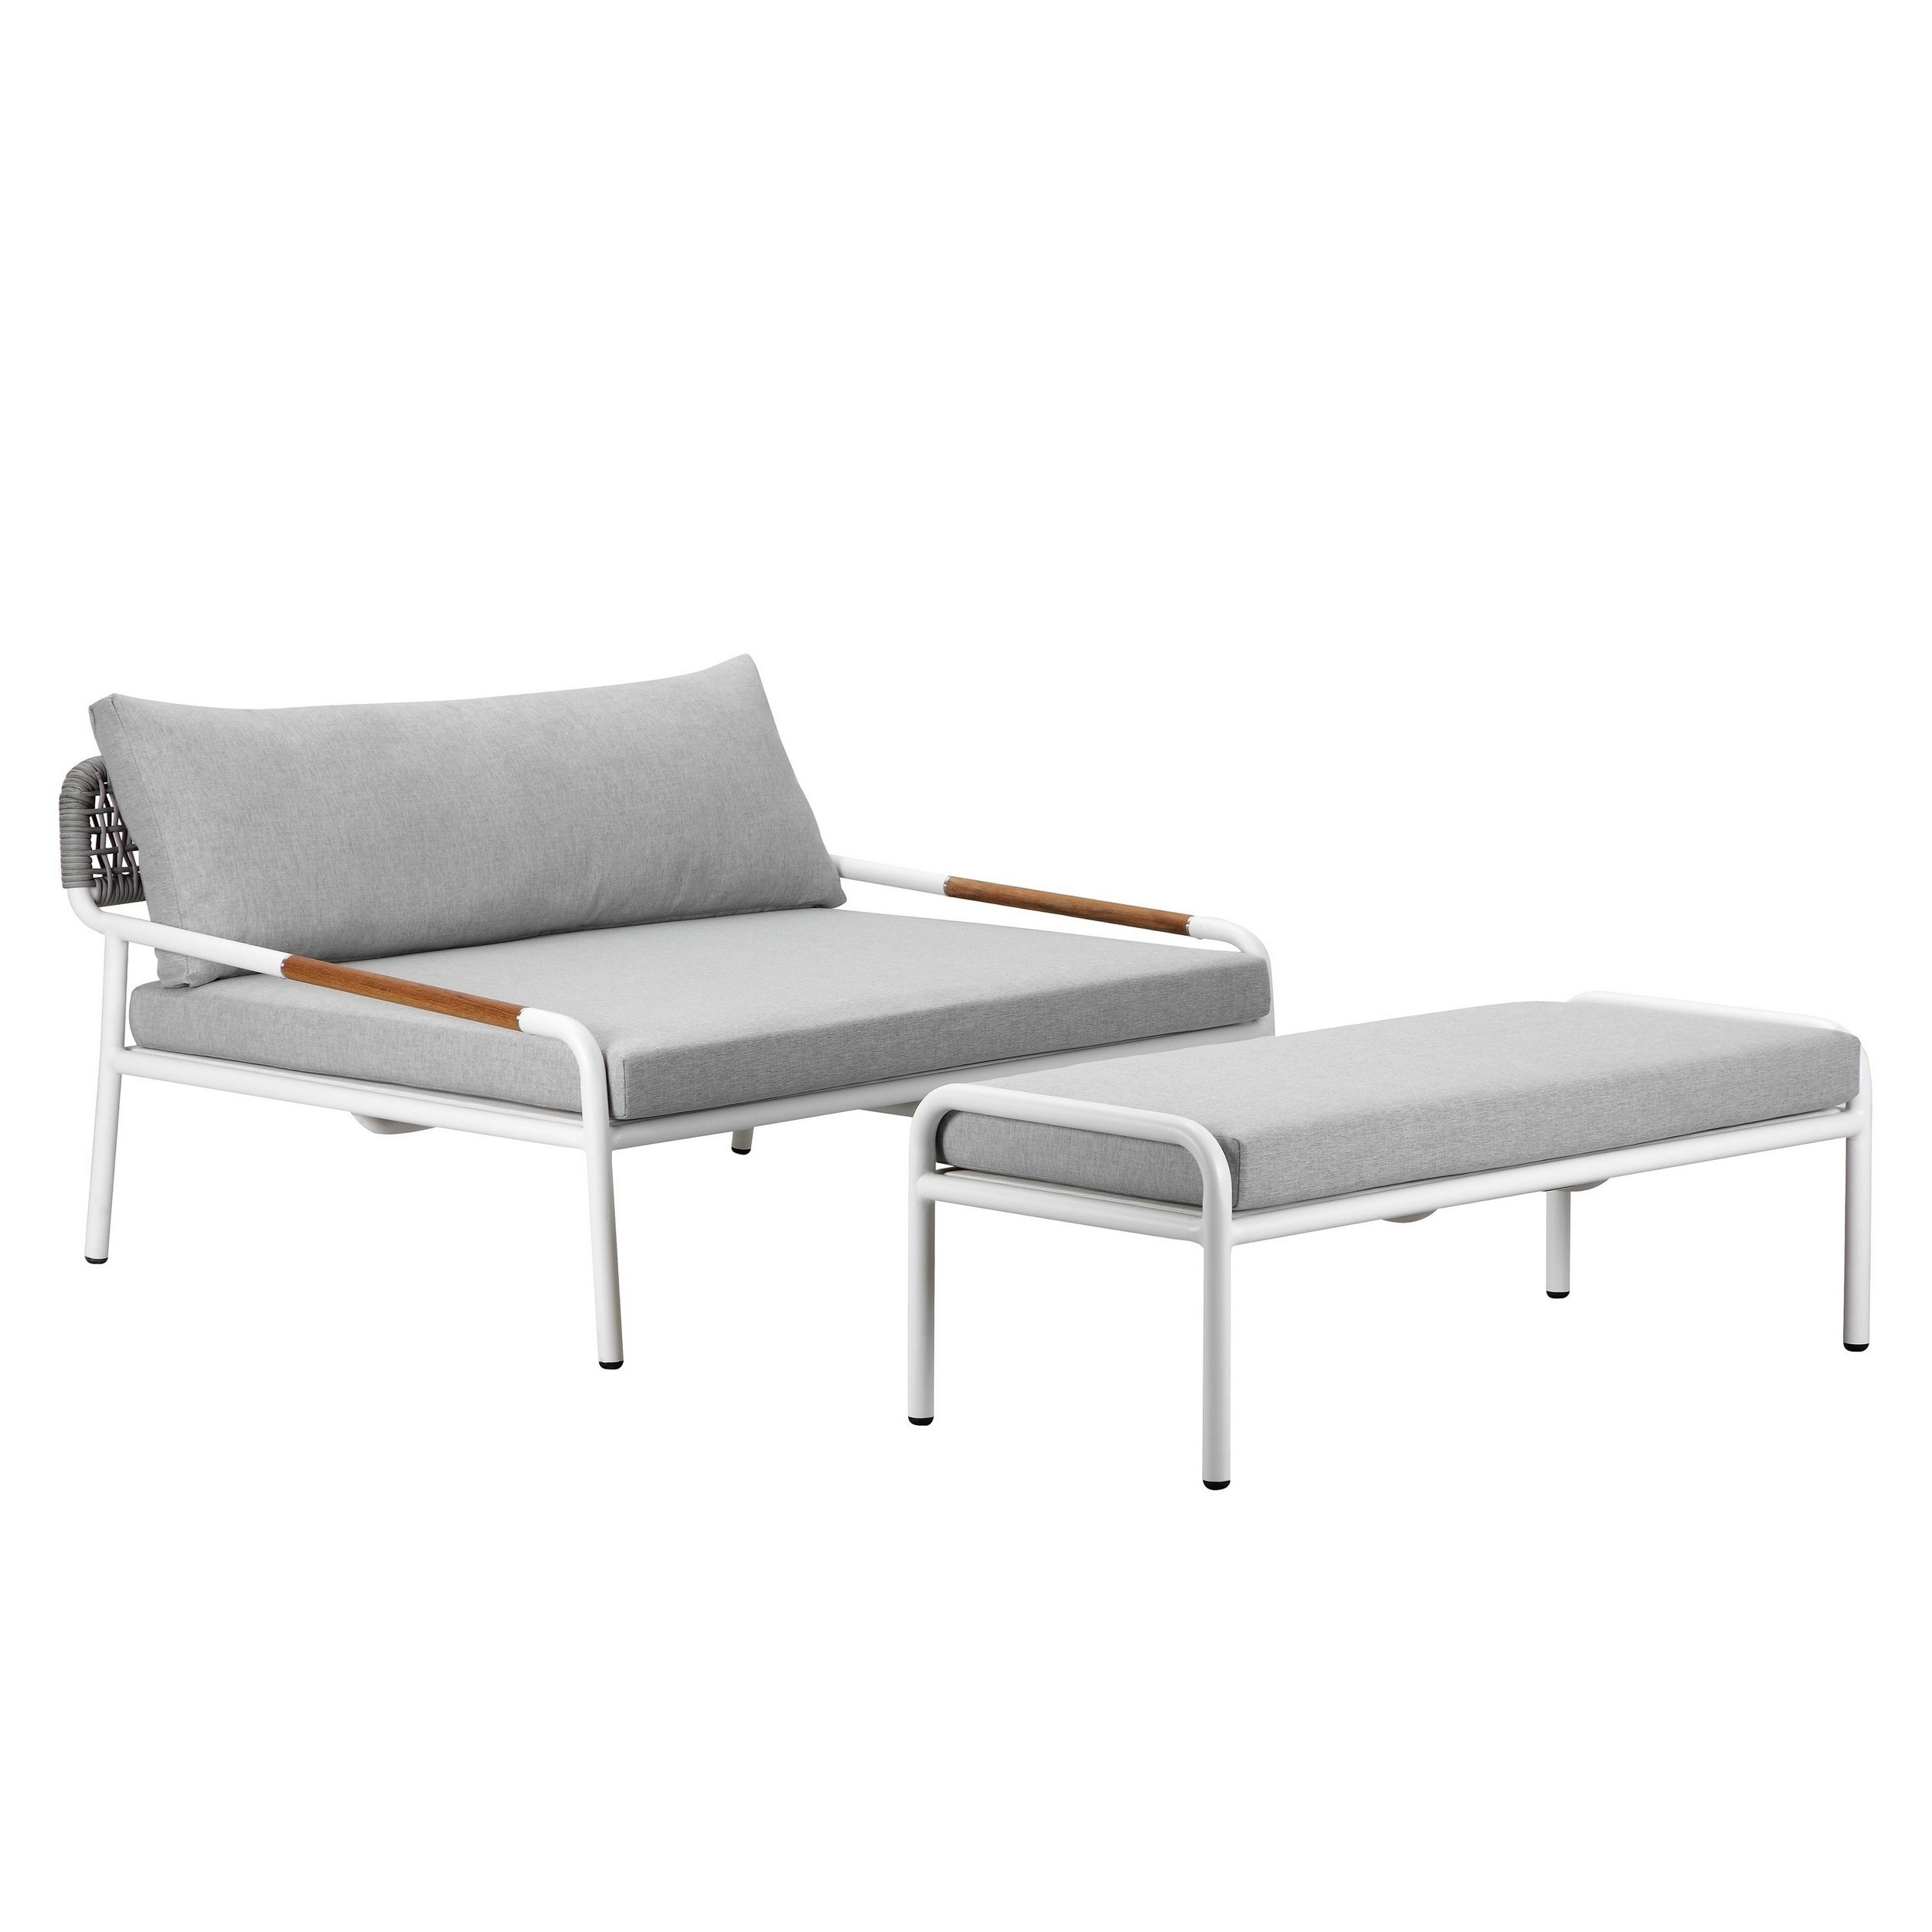 Shia 2 Piece Outdoor Daybed Set  Classic White Aluminum Frames  Ottoman